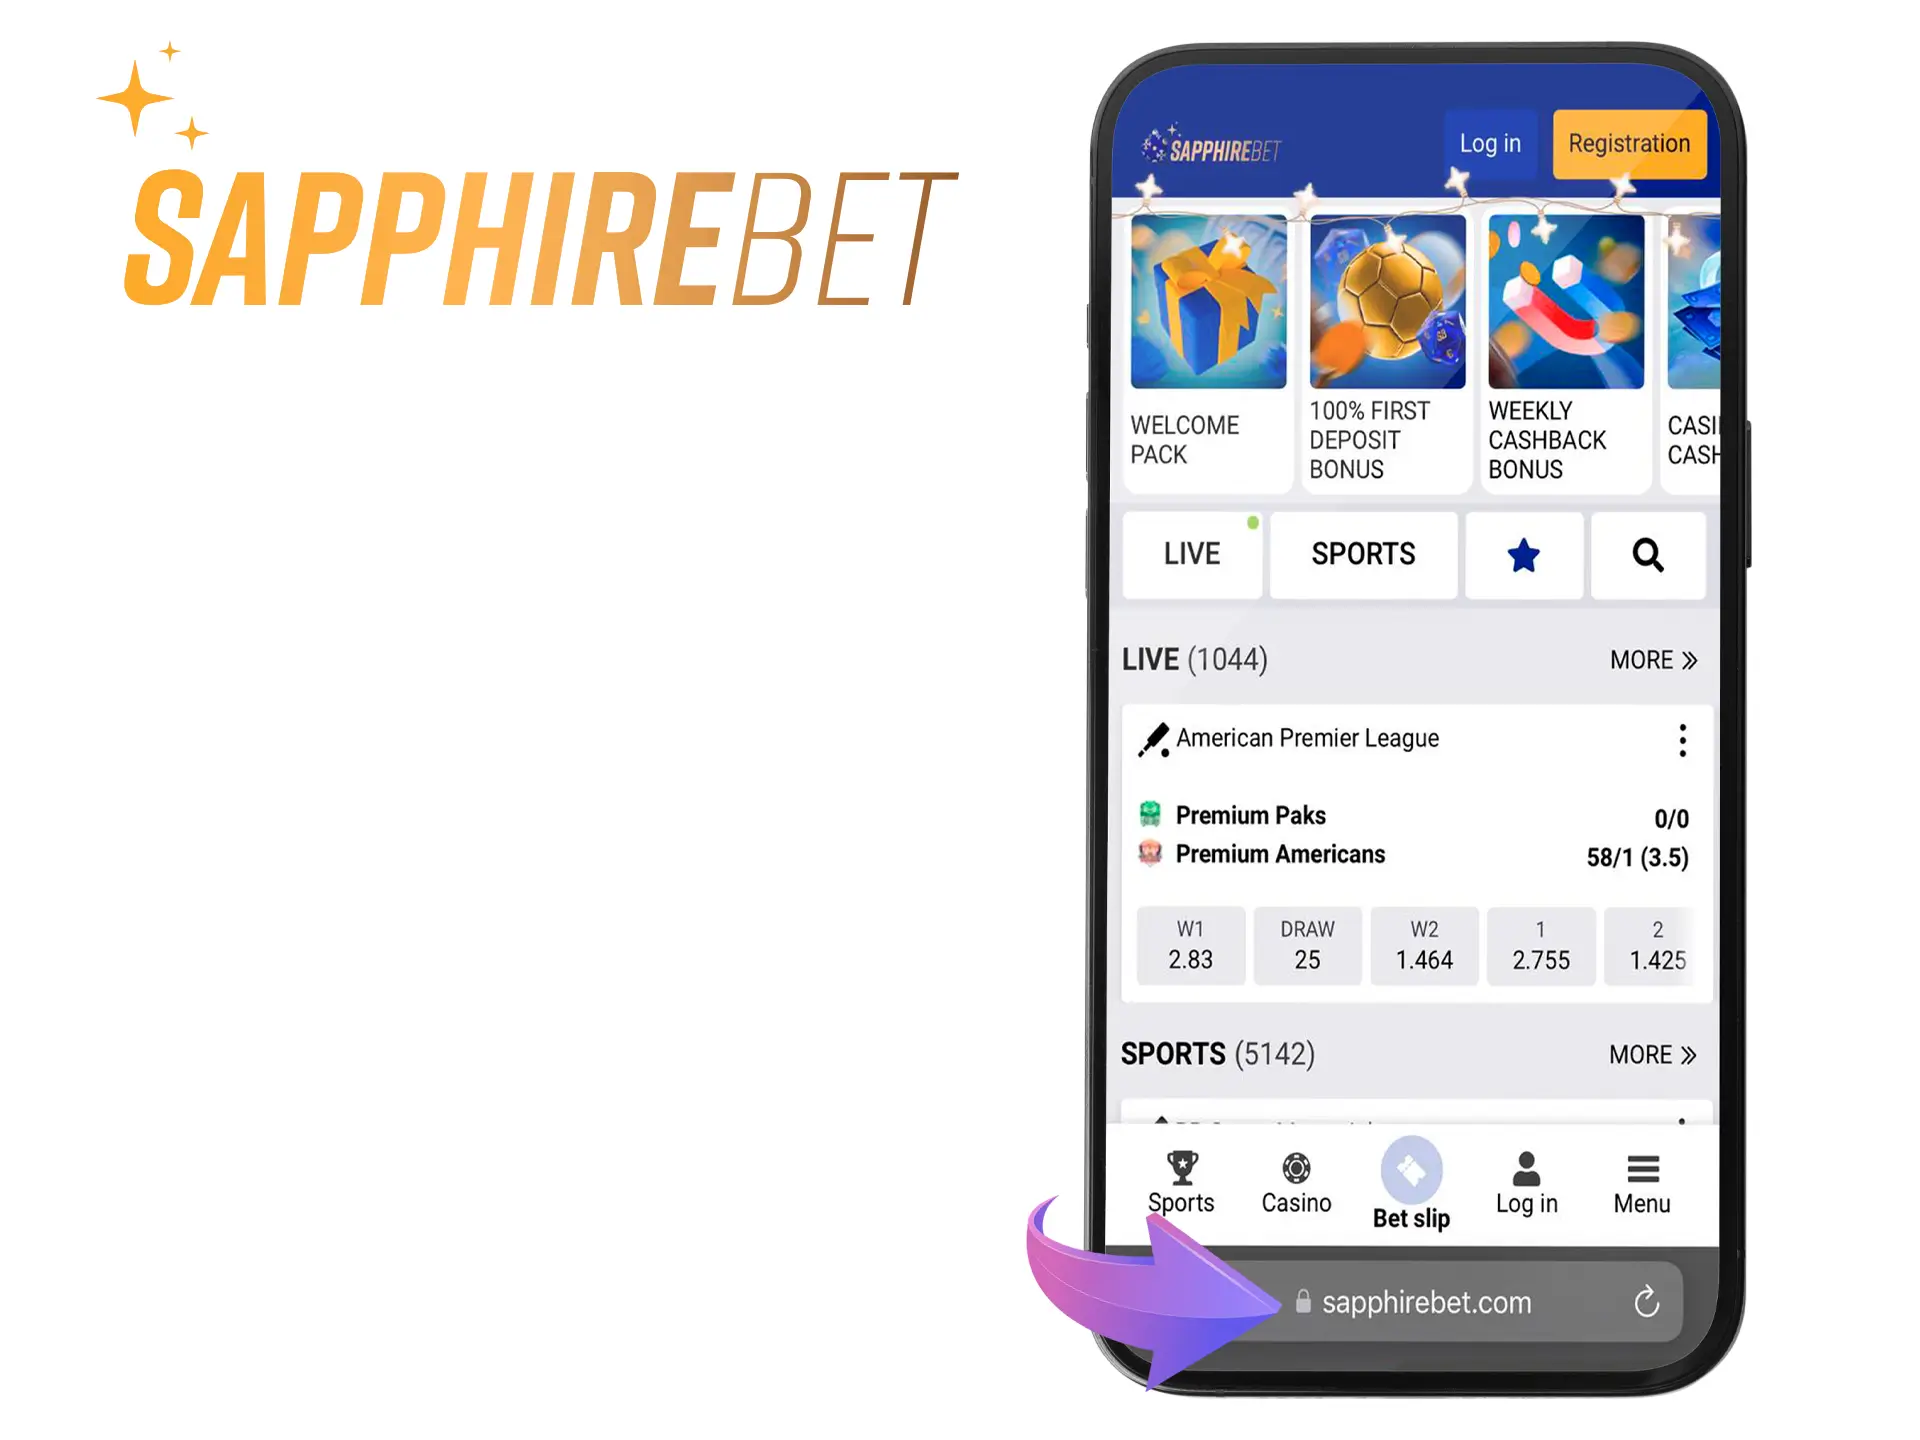 Go to the offical site of Sapphirebet Casino.